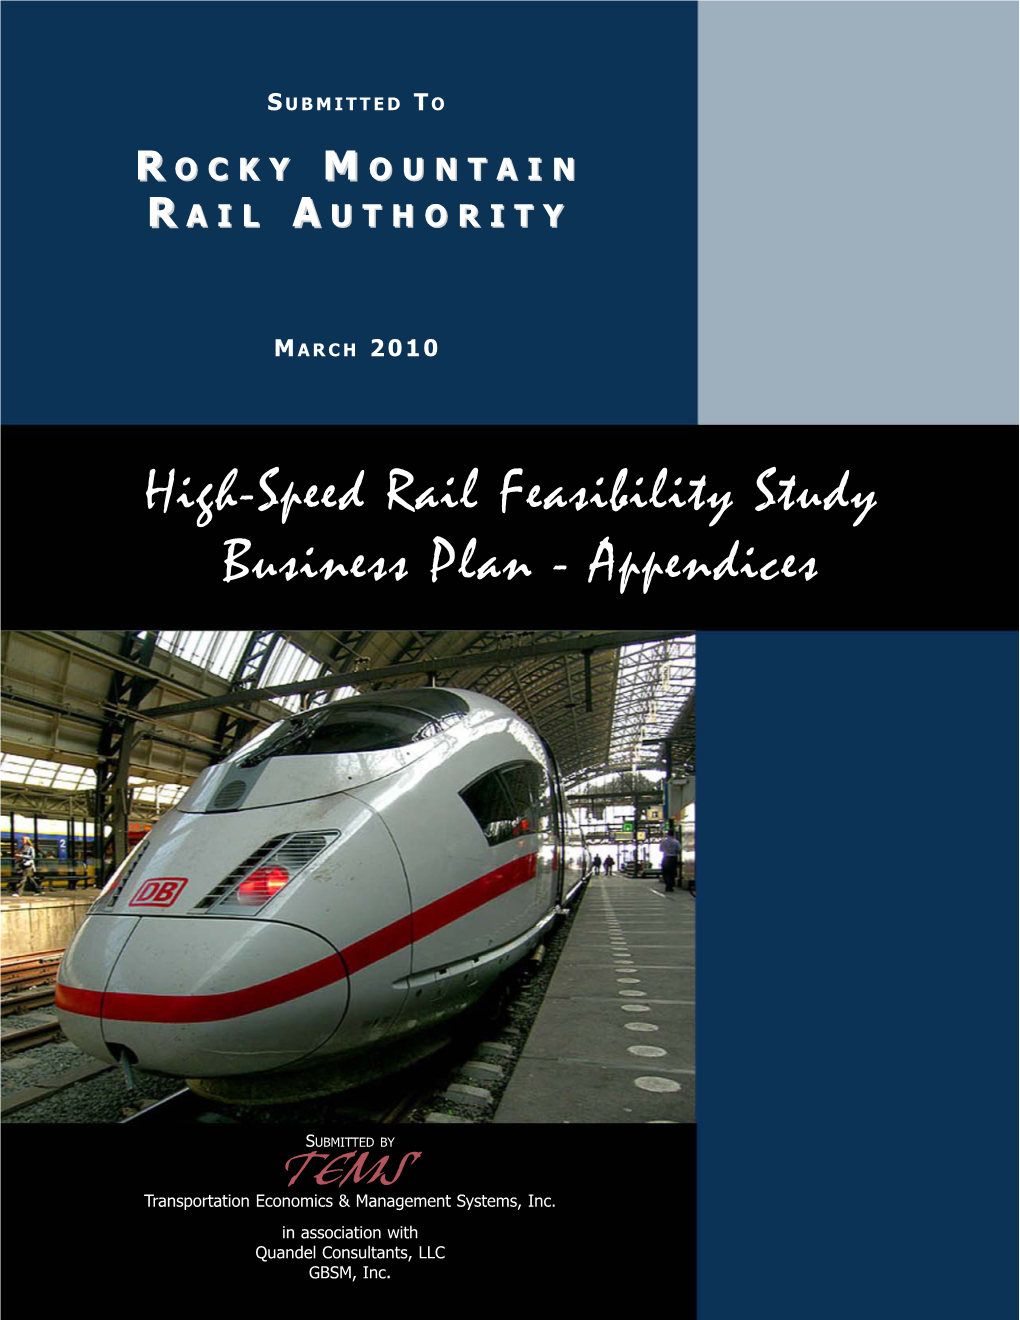 High-Speed Rail Feasibility Study Business Plan - Appendices